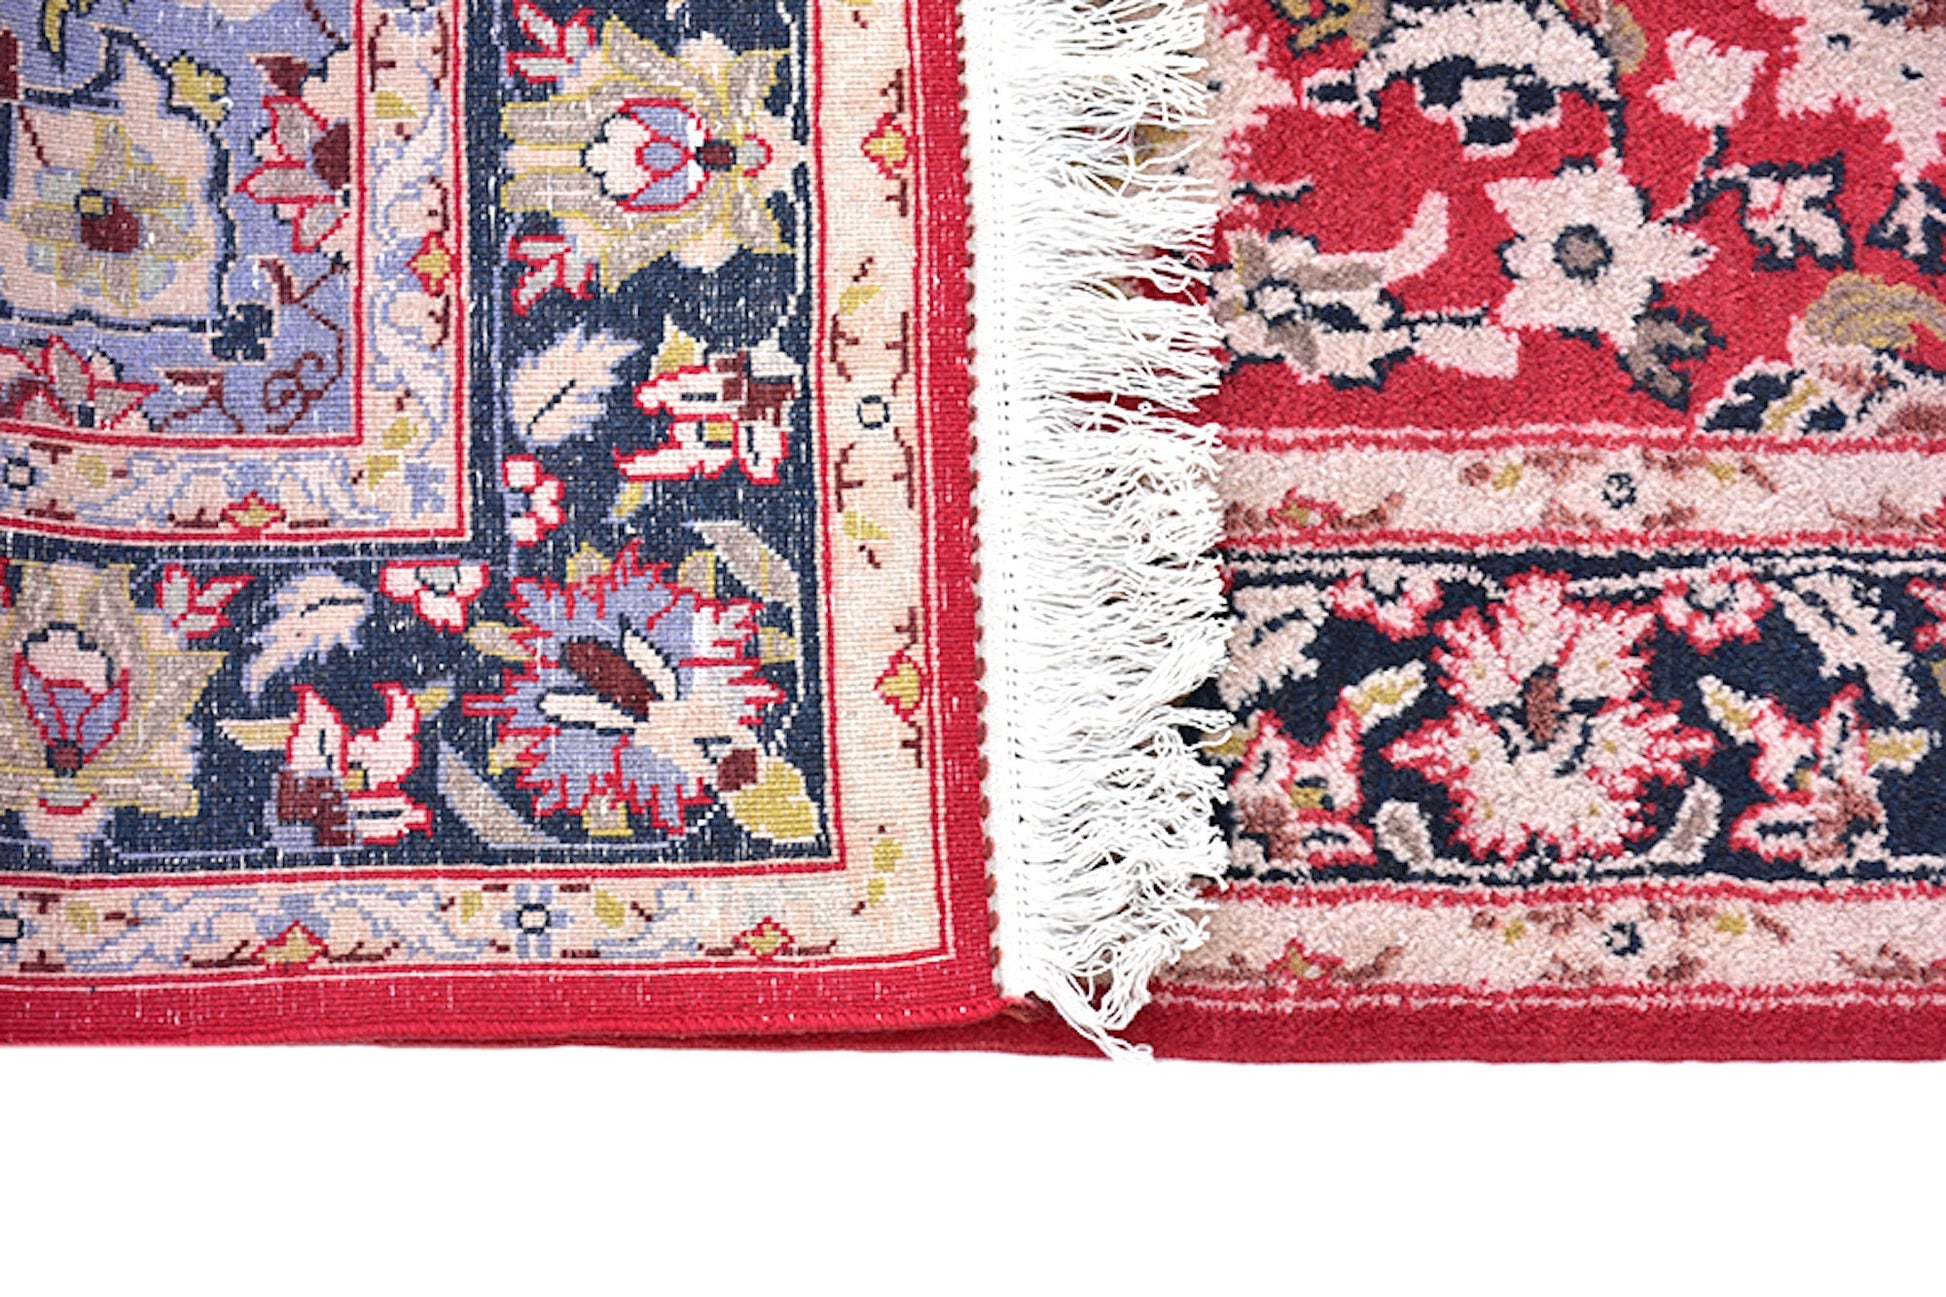 4 x 6 Red Oriental Medallion Rug | Handmade One of a Kind Persian Design | Home Accent Rug